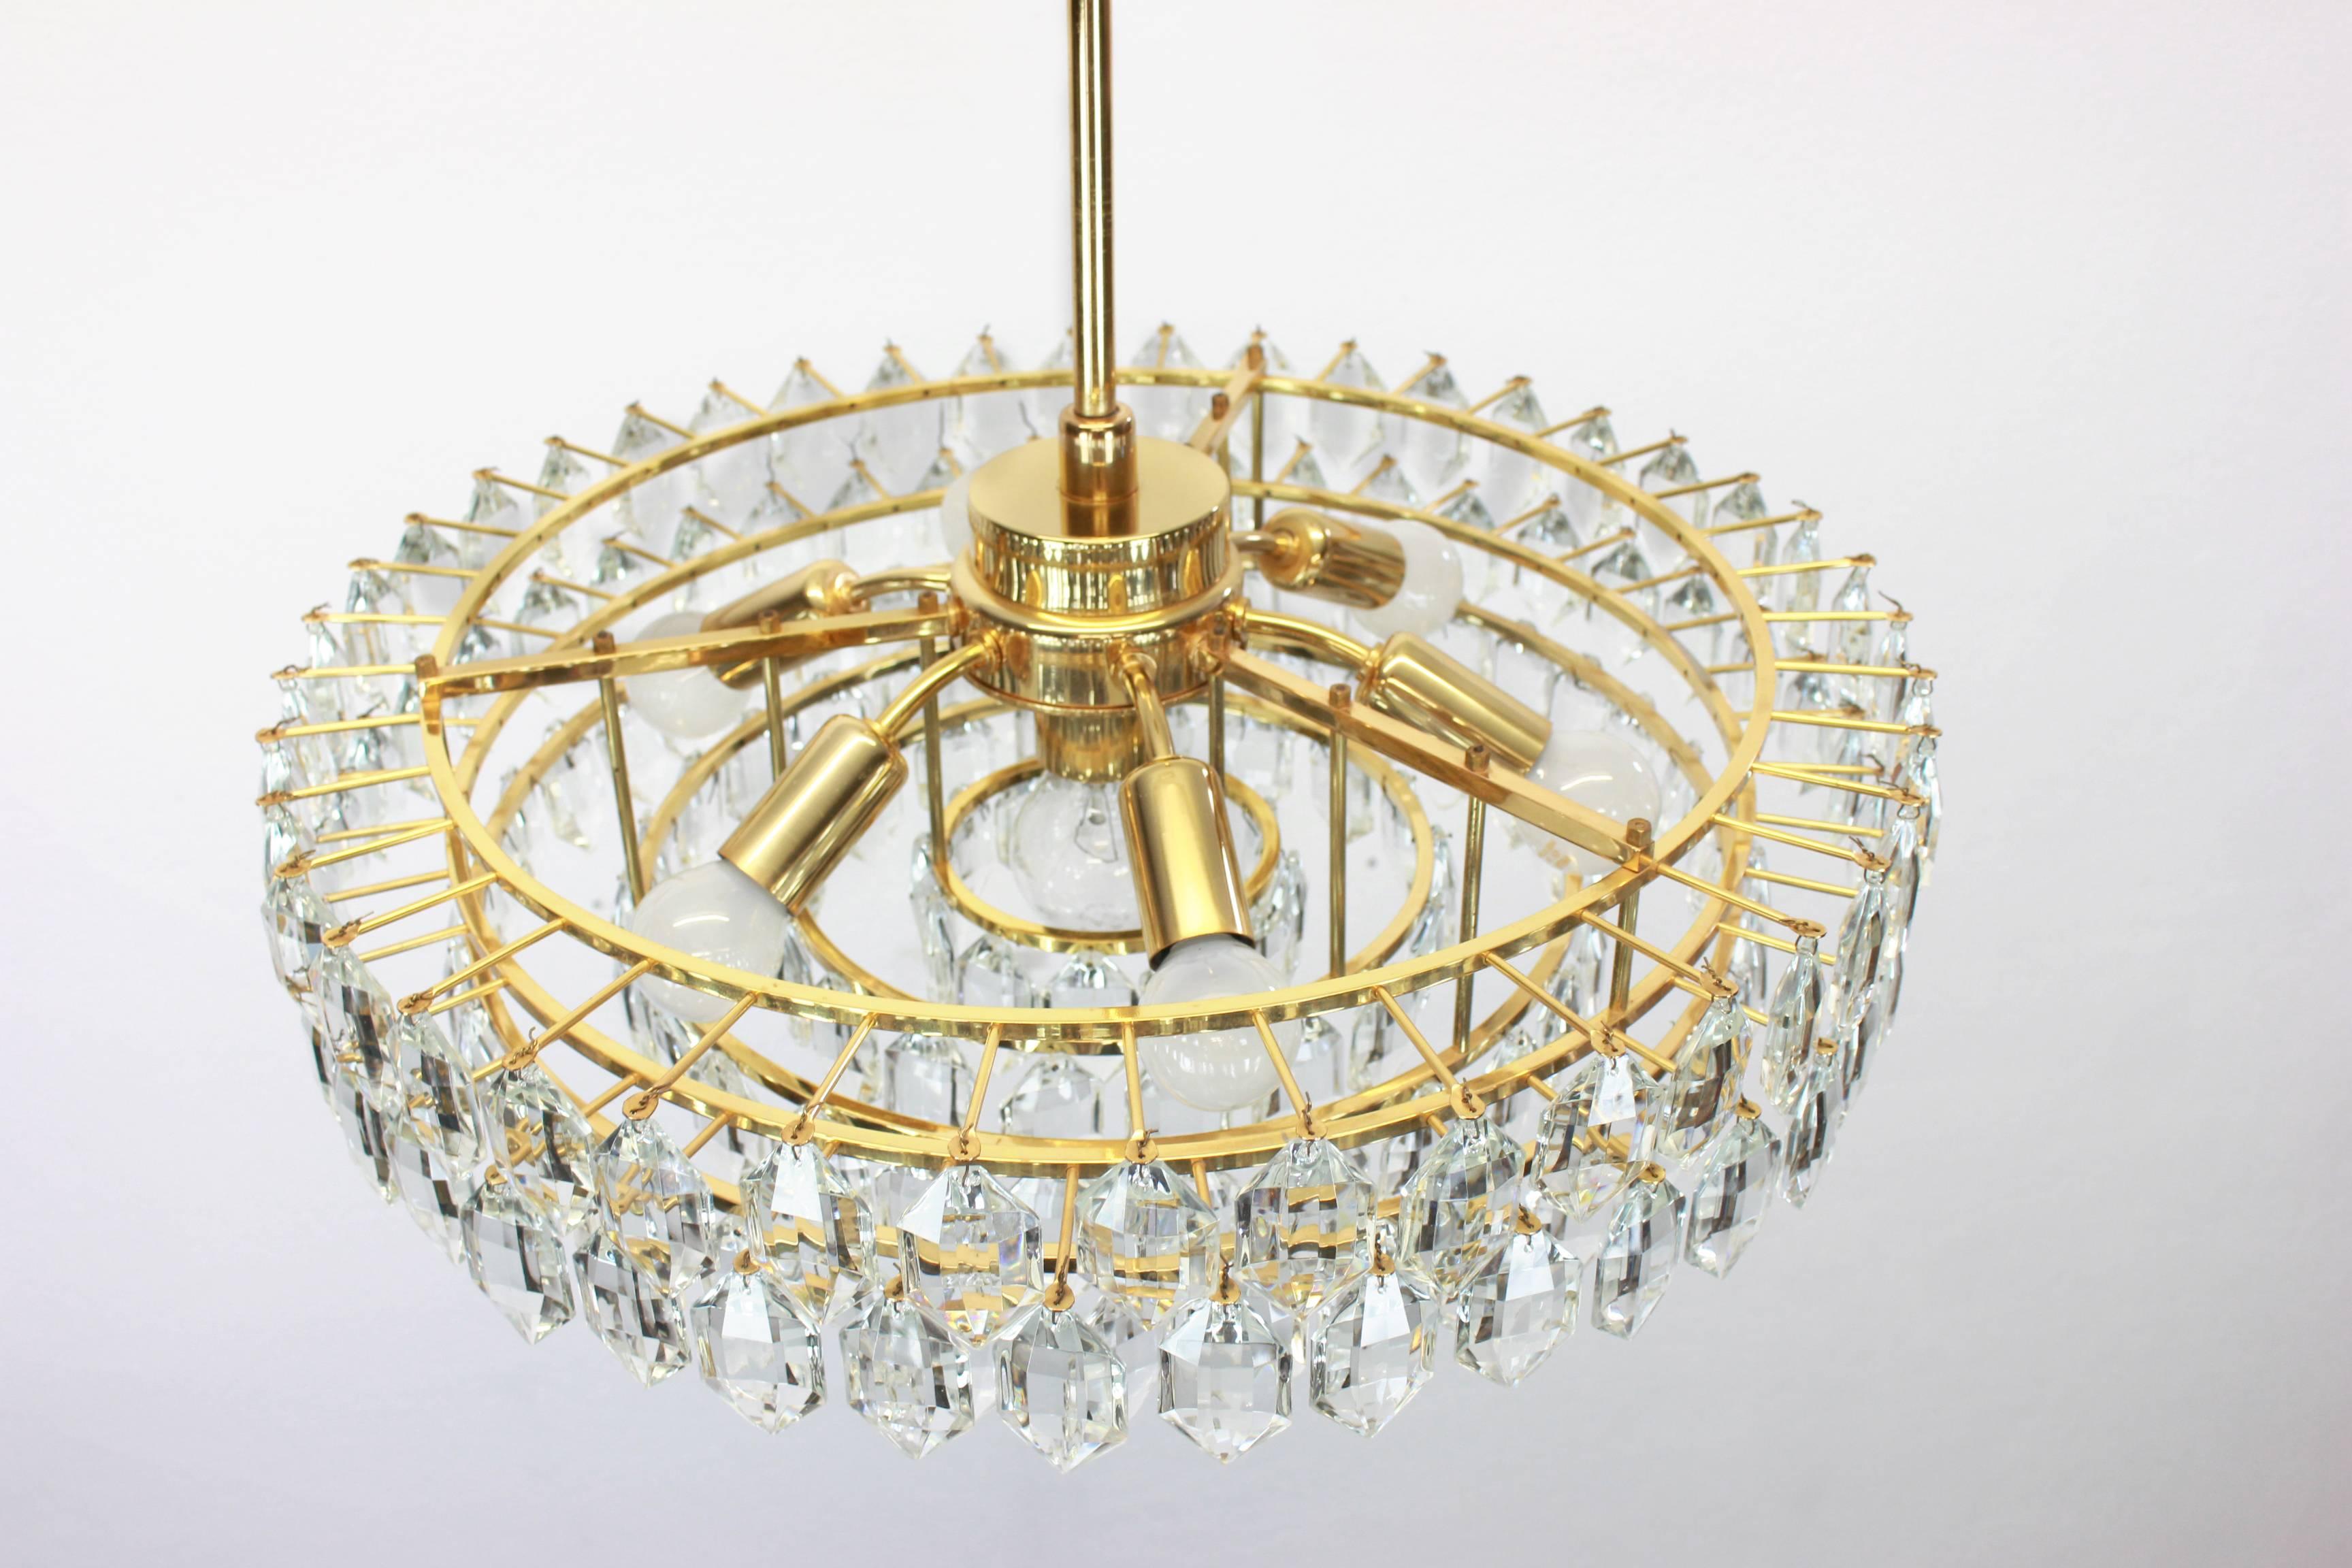 A stunning six-tier chandelier by Bakalowits & Sohne, Austria, manufactured in circa 1960-1969. A handmade and high quality piece. The ceiling fixture and the frame are made of gilt brass and has six rings with lots of facetted crystal glass